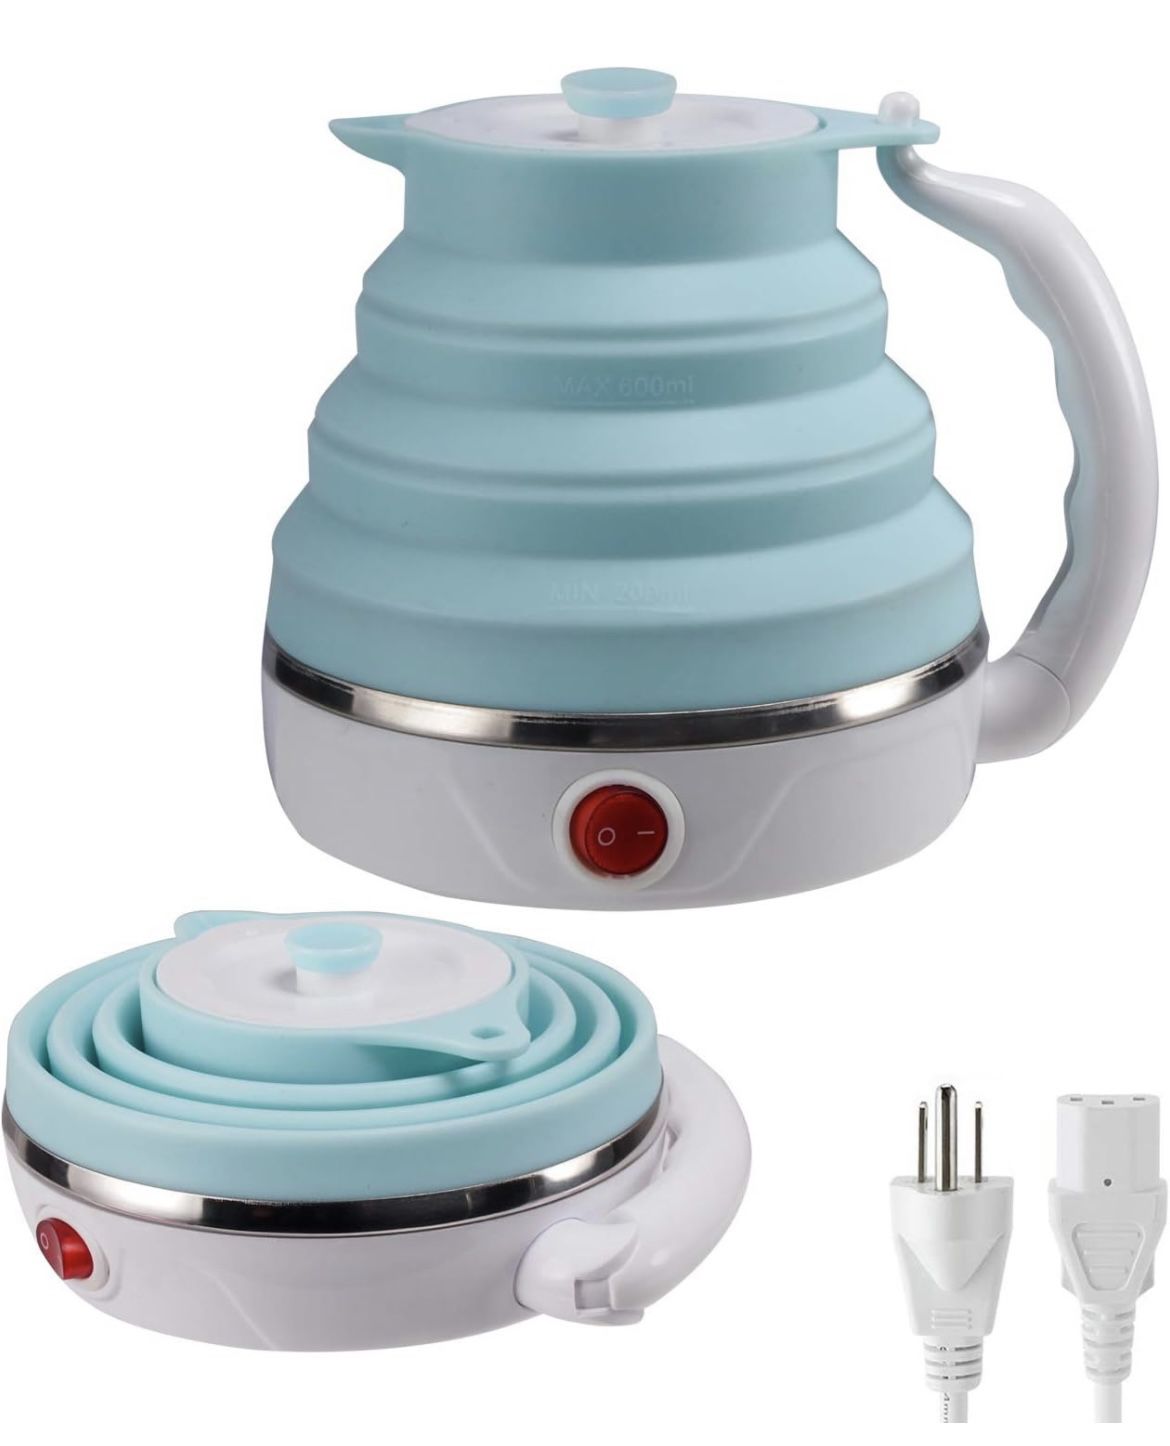 Travel Foldable Electric Kettle, Collapsible Electric Kettle Food Grade Silicone